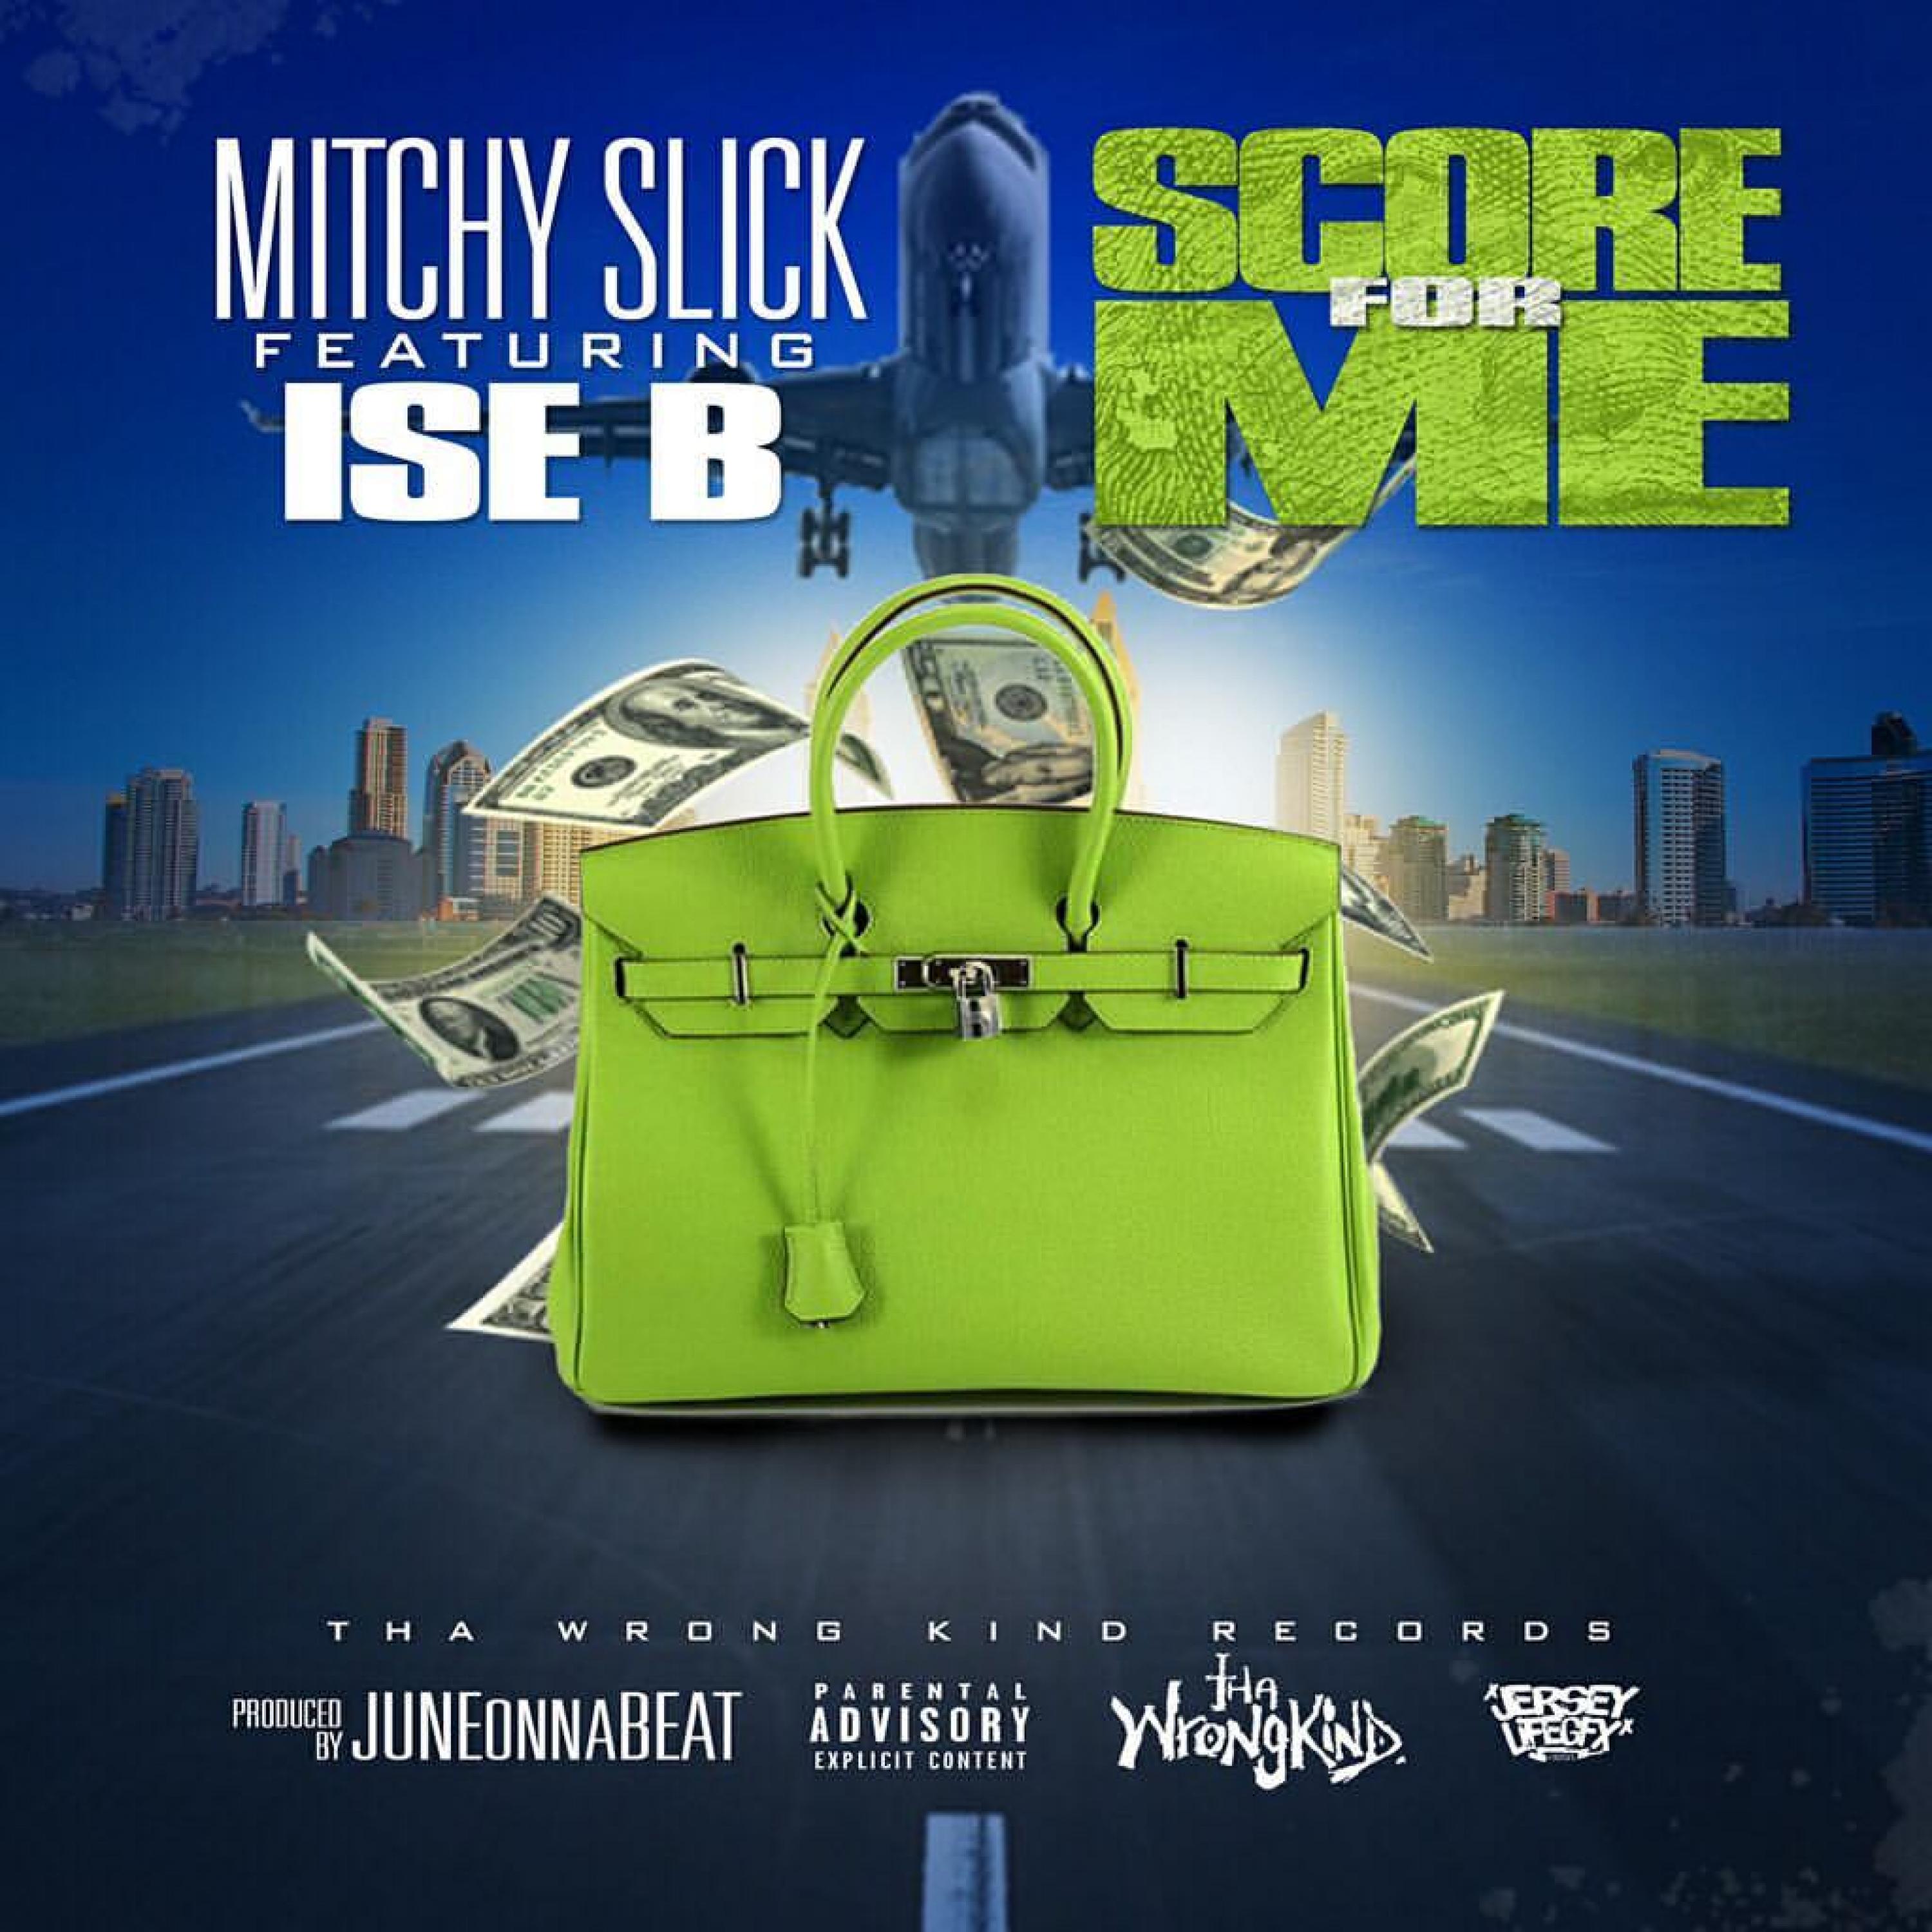 Score for Me (feat. Ise B) - Single